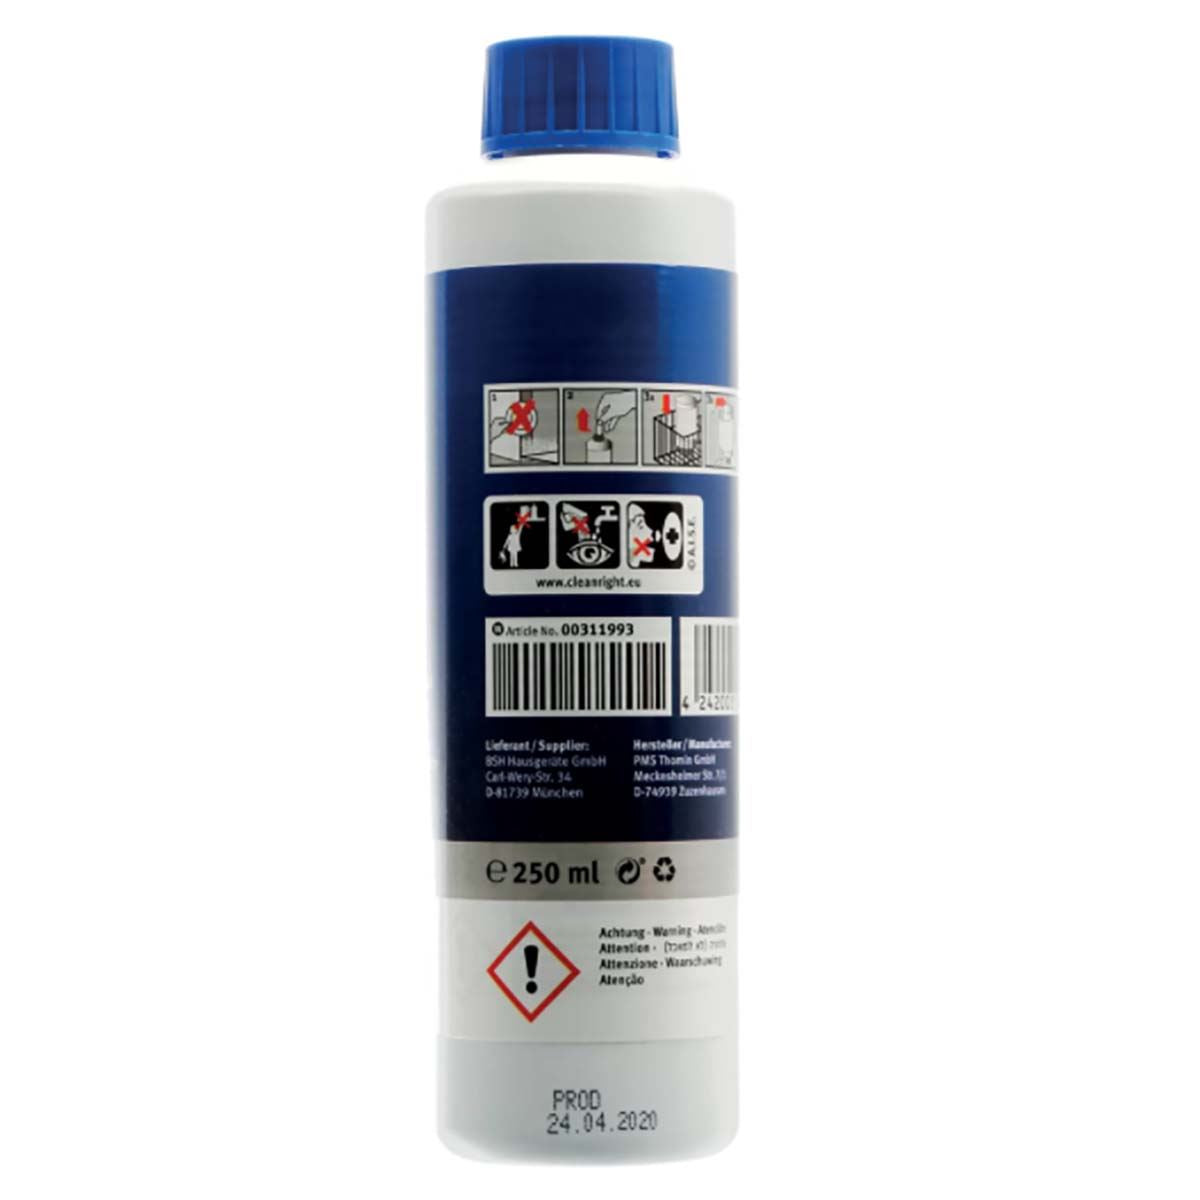 Bosch 00311993 00311565 Original Dishwasher Cleaner Removes Grease and Limescale, 250ml